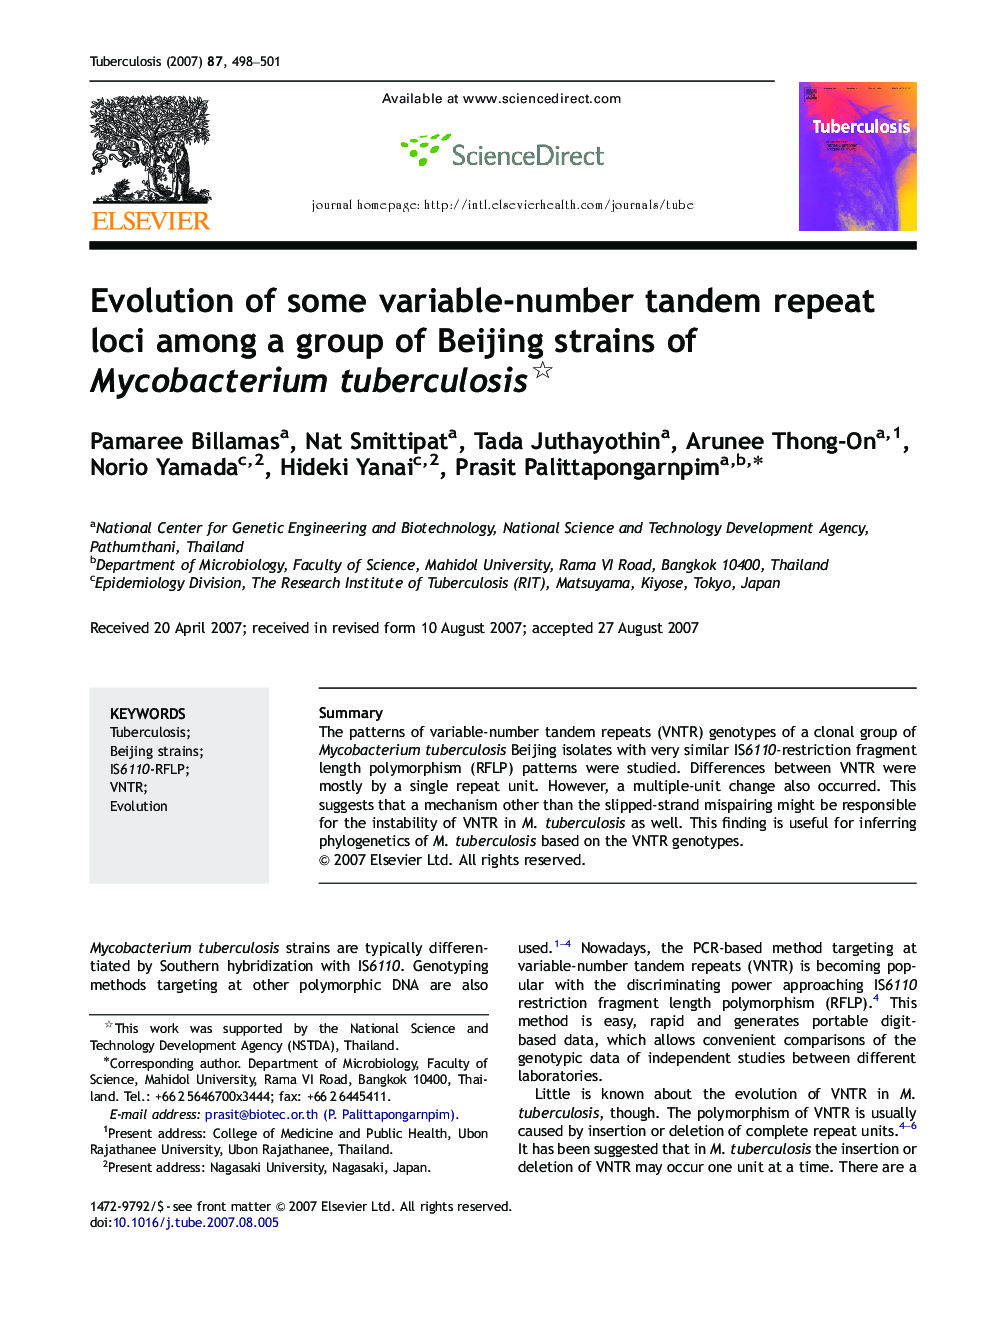 Evolution of some variable-number tandem repeat loci among a group of Beijing strains of Mycobacterium tuberculosis 